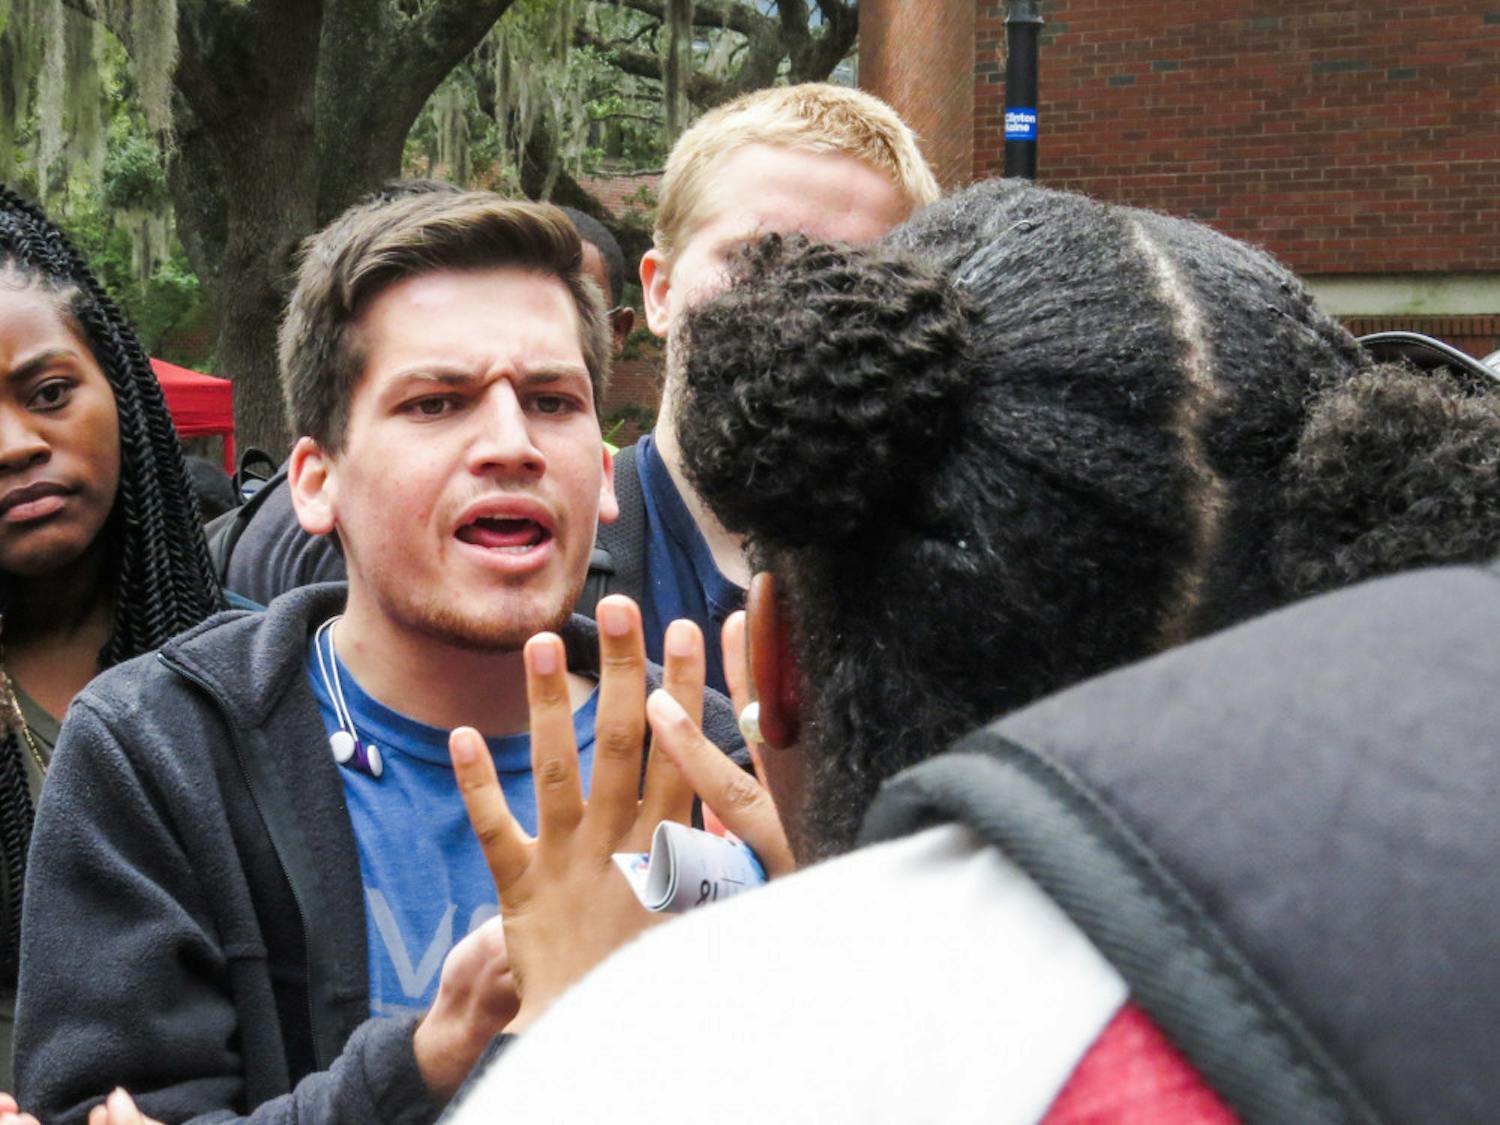 Chris Salazar, a 19-year-old UF finance freshman, argues in a tight group on Turlington Plaza during a protest against President-elect Donald Trump on Monday. "He's my president,” Salazar said after arguing. “Democracy decided. I'm going to support him." Read more on page 3. 